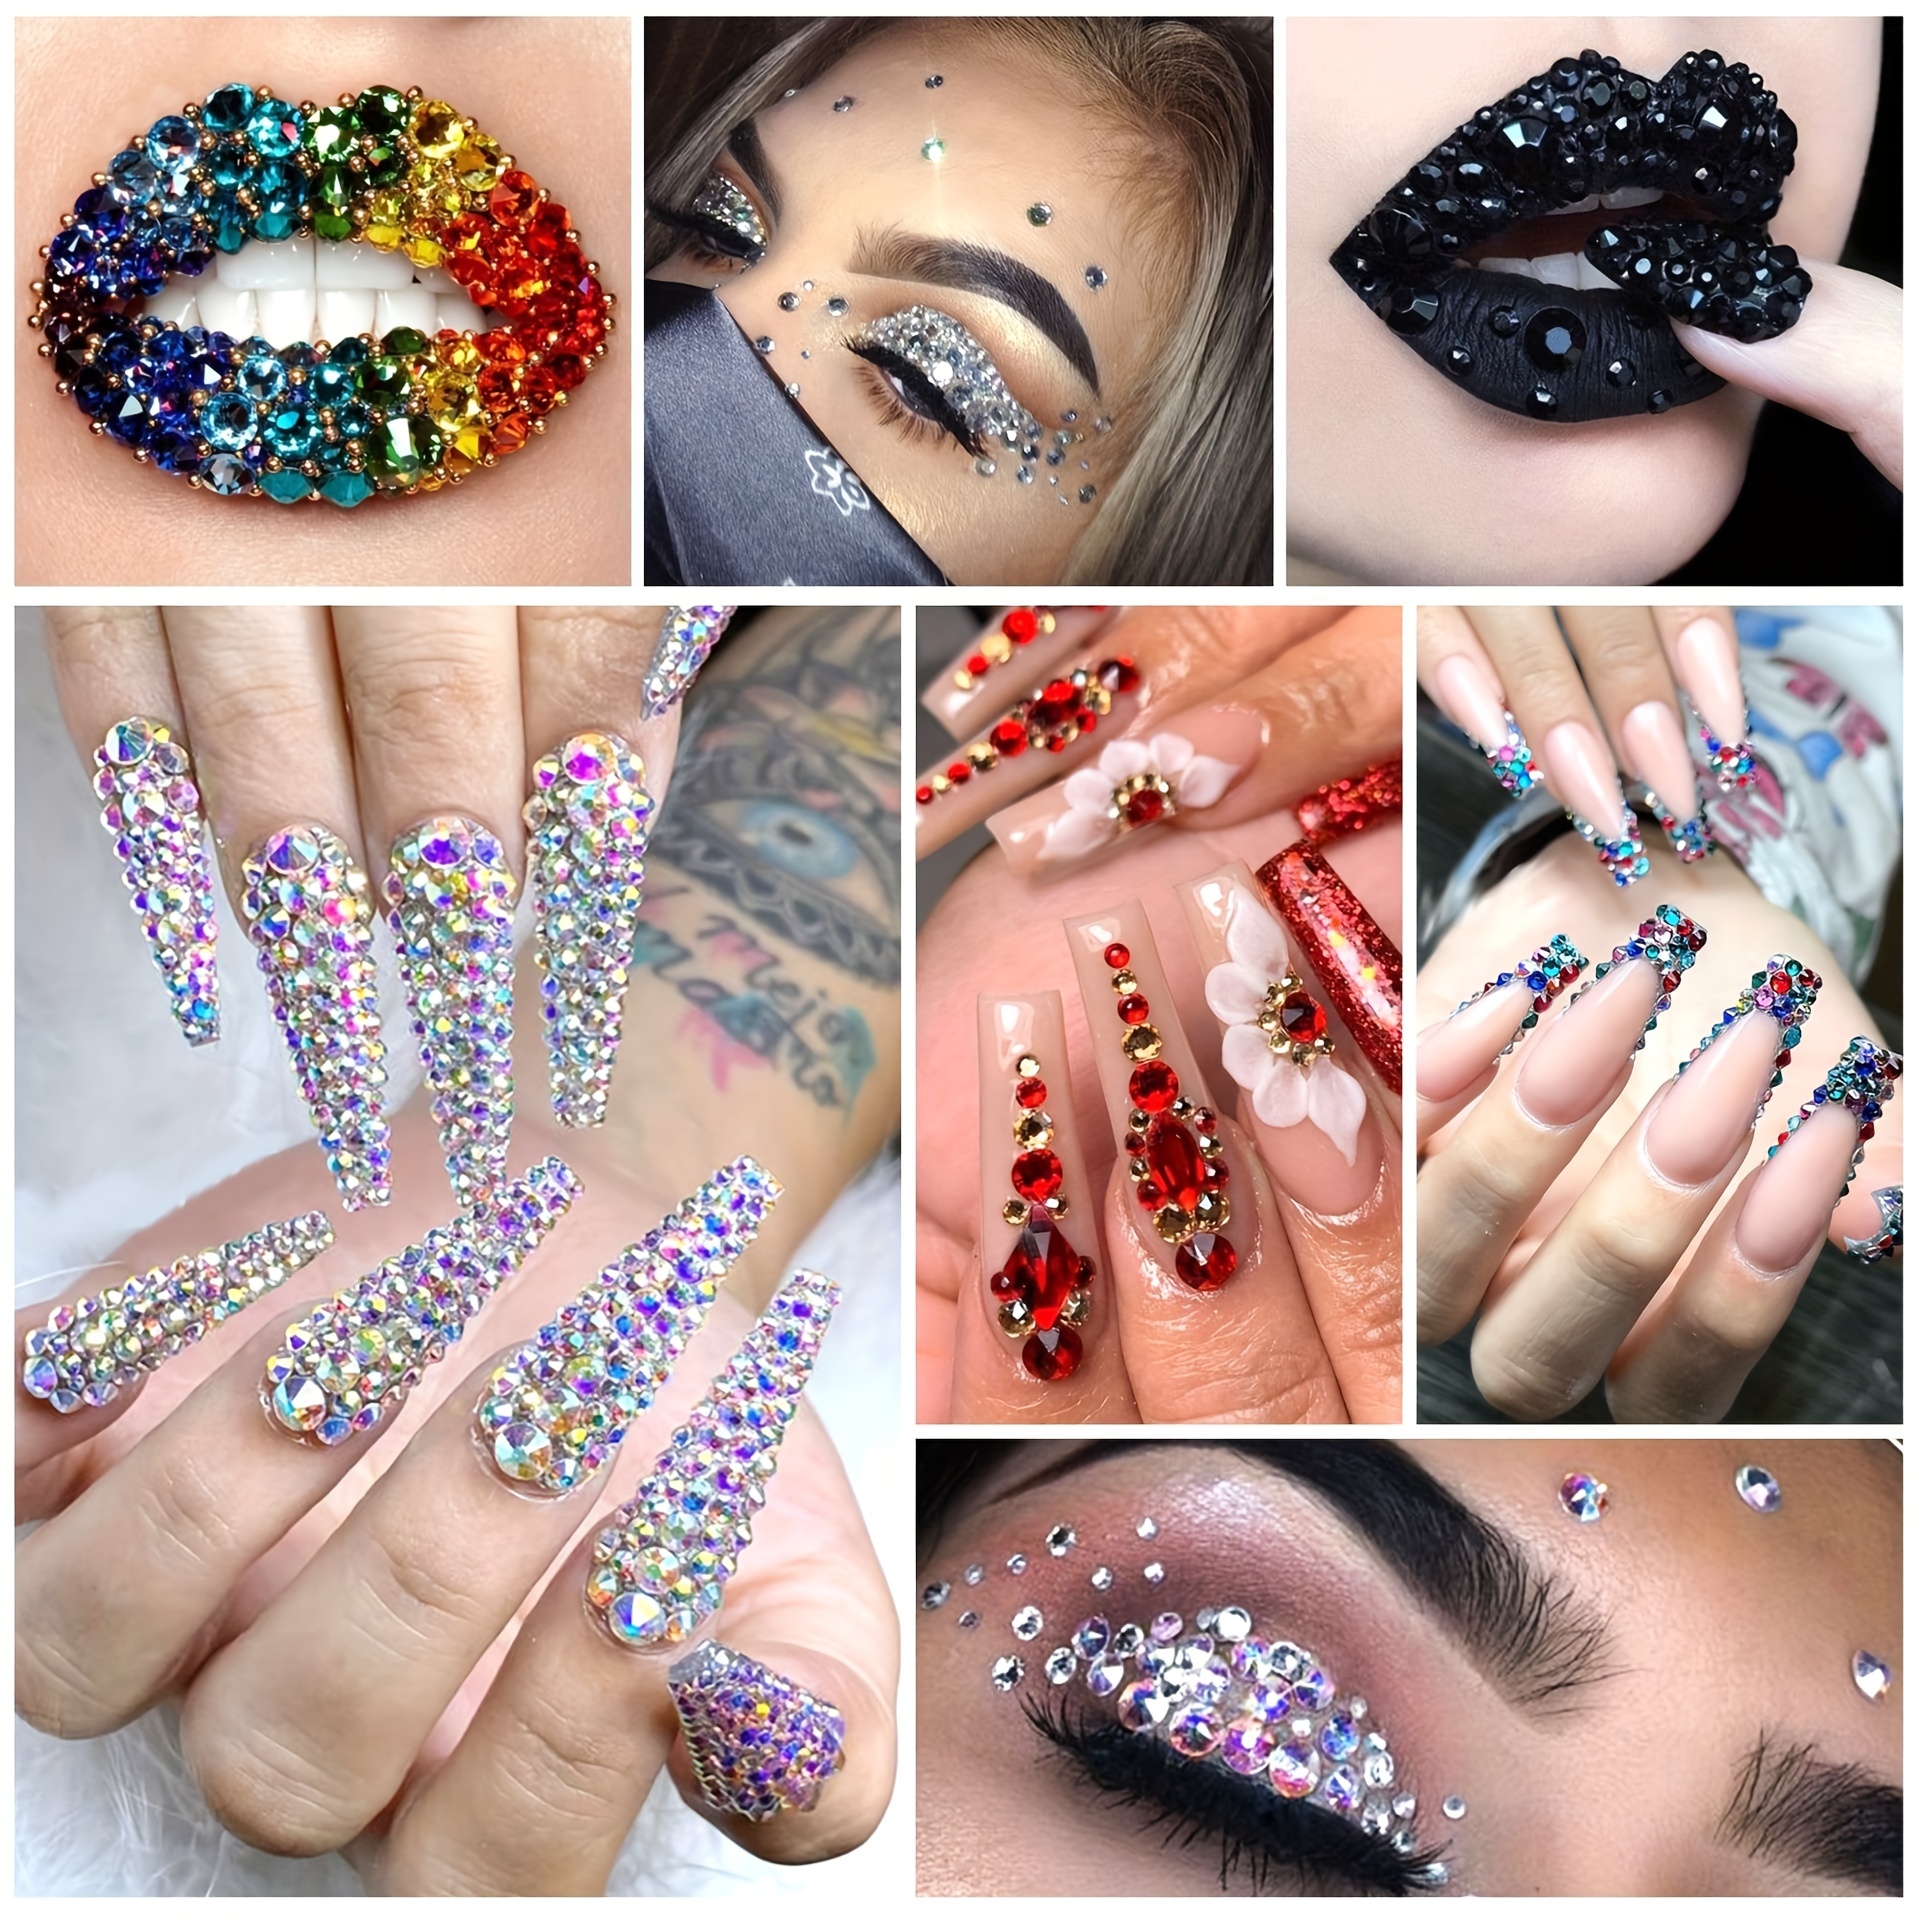 Mixed Crystal Rhinestones For DIY Nail Art Snowflakes Glitter Luxury  Flatback Shiny Glass Stones For 3D Glitter From Pokkie, $31.56